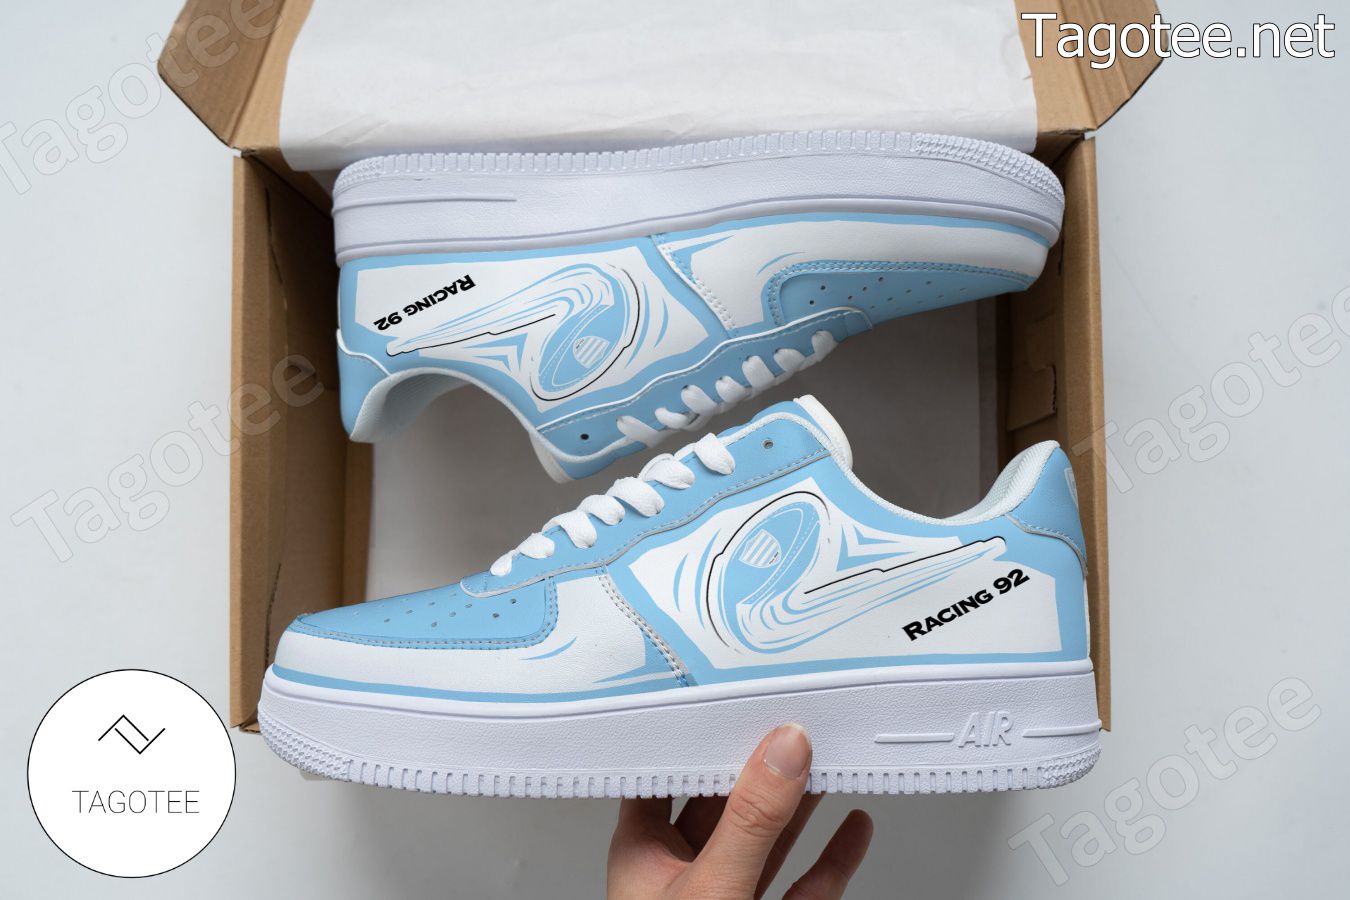 Racing 92 Logo Air Force 1 Shoes a